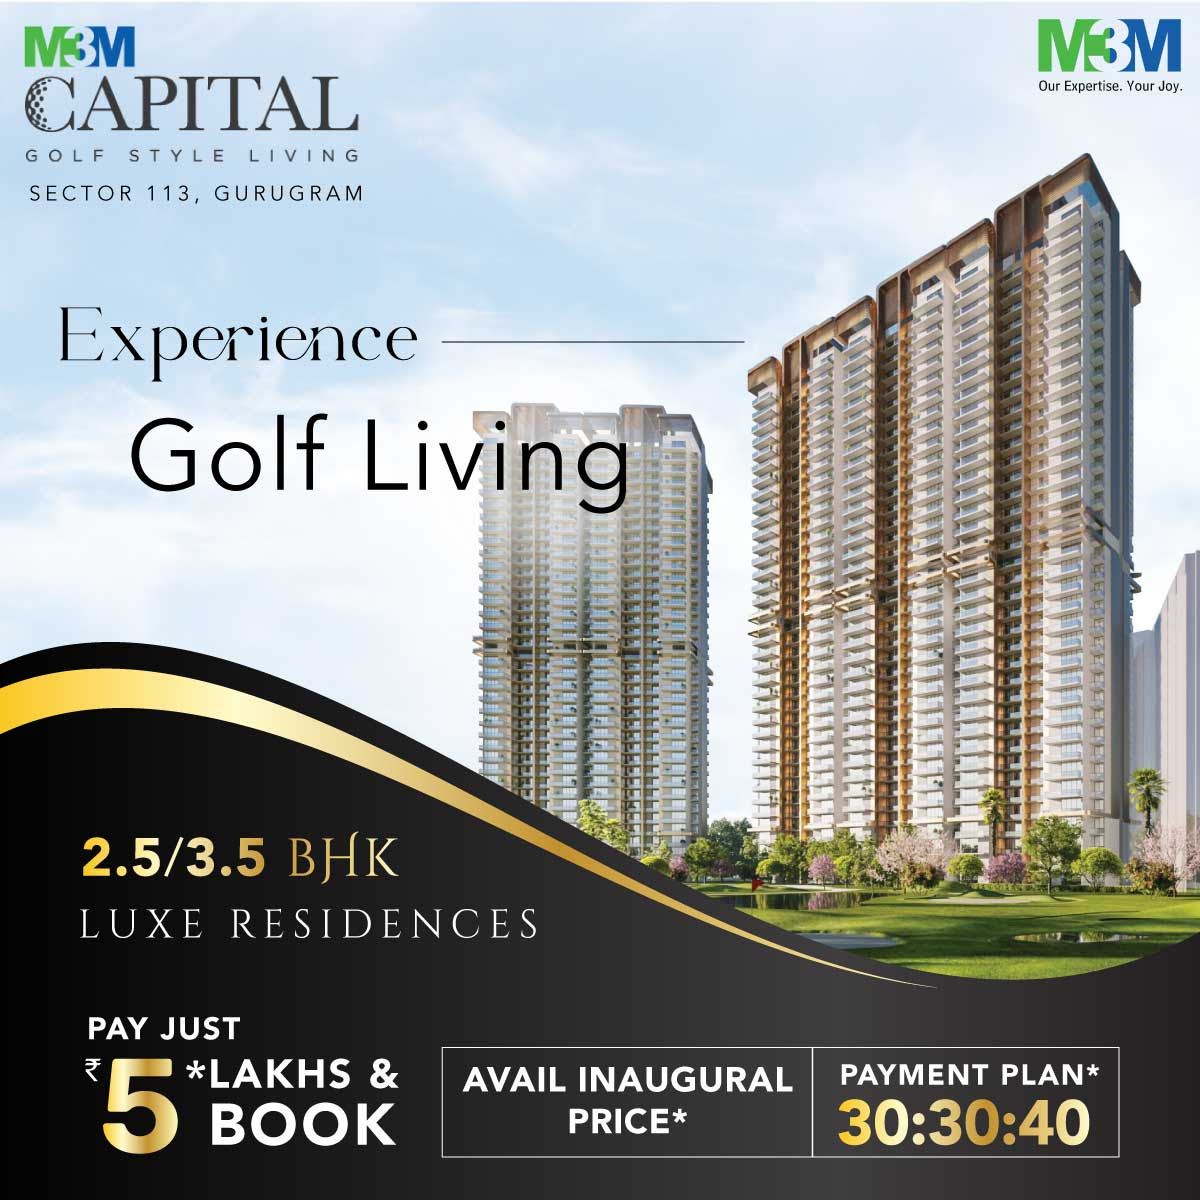 Presenting 30:30:40 payment plan at M3M Capital in Sector 113, Gurgaon Update